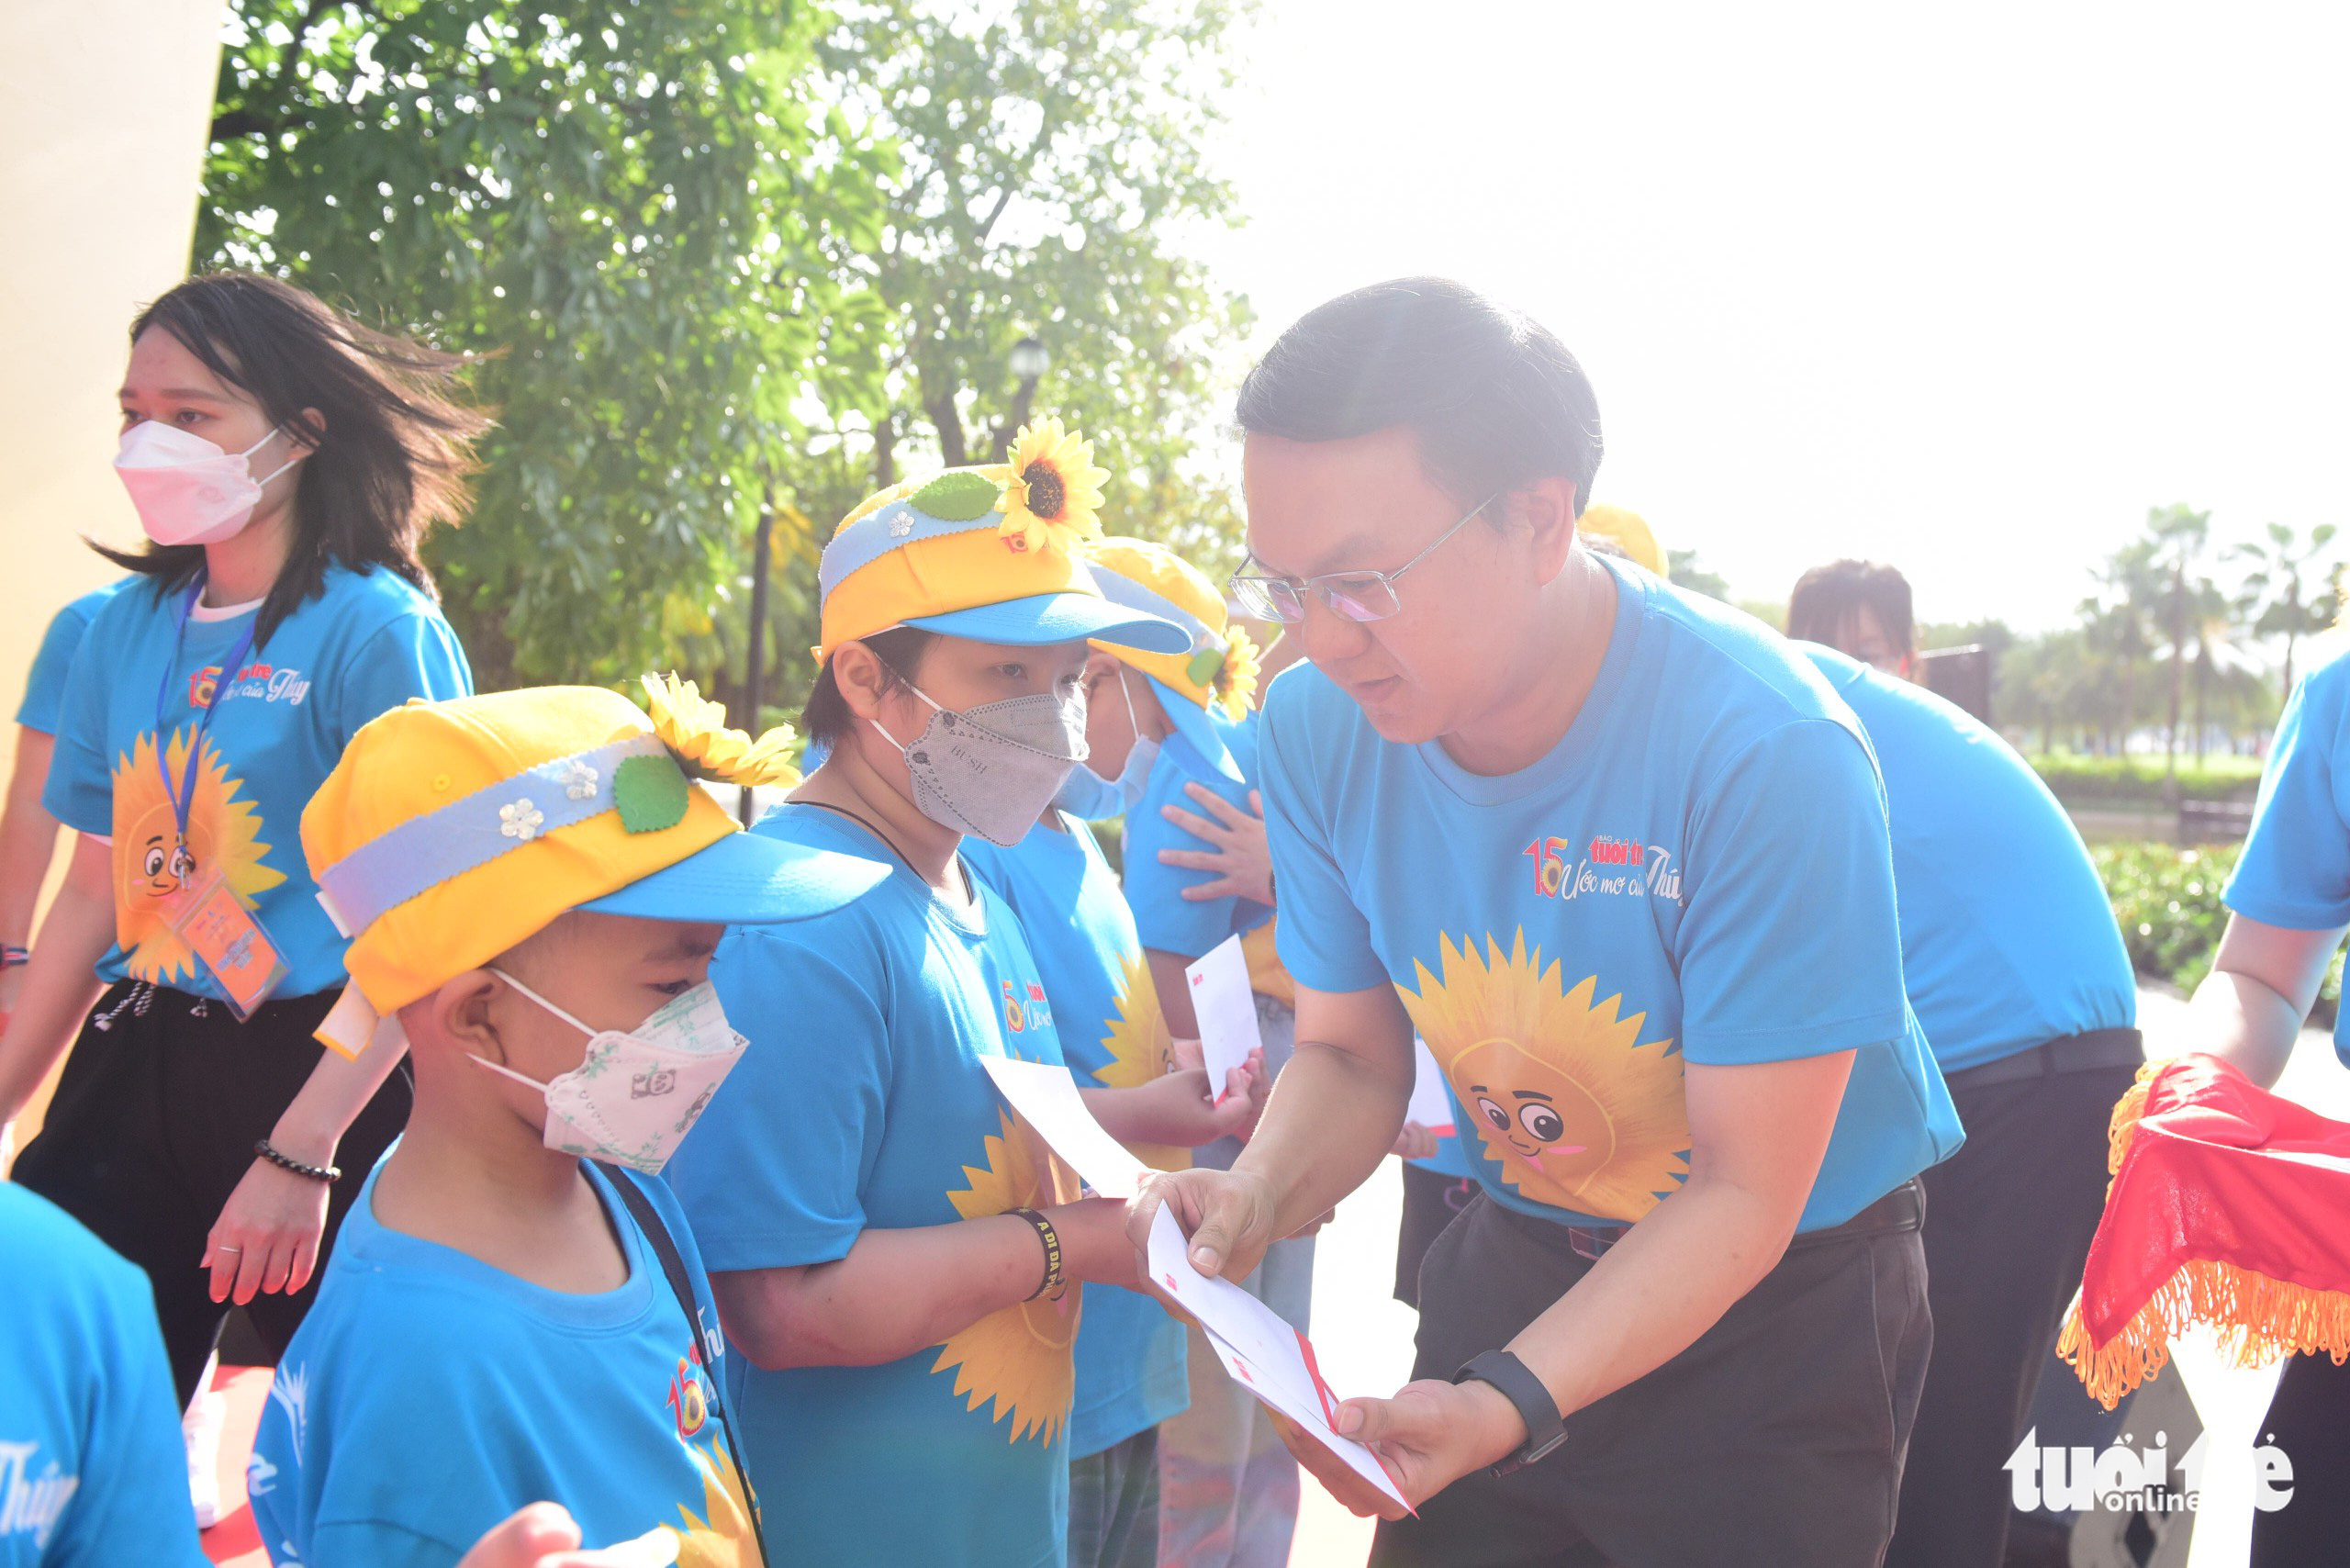 Director of the Ho Chi Minh City Department of Information and Communications Lam Dinh Thang hands scholarships to children with cancer in Binh Thanh District, Ho Chi Minh City, May 22, 2022. Photo: Duyen Phan / Tuoi Tre